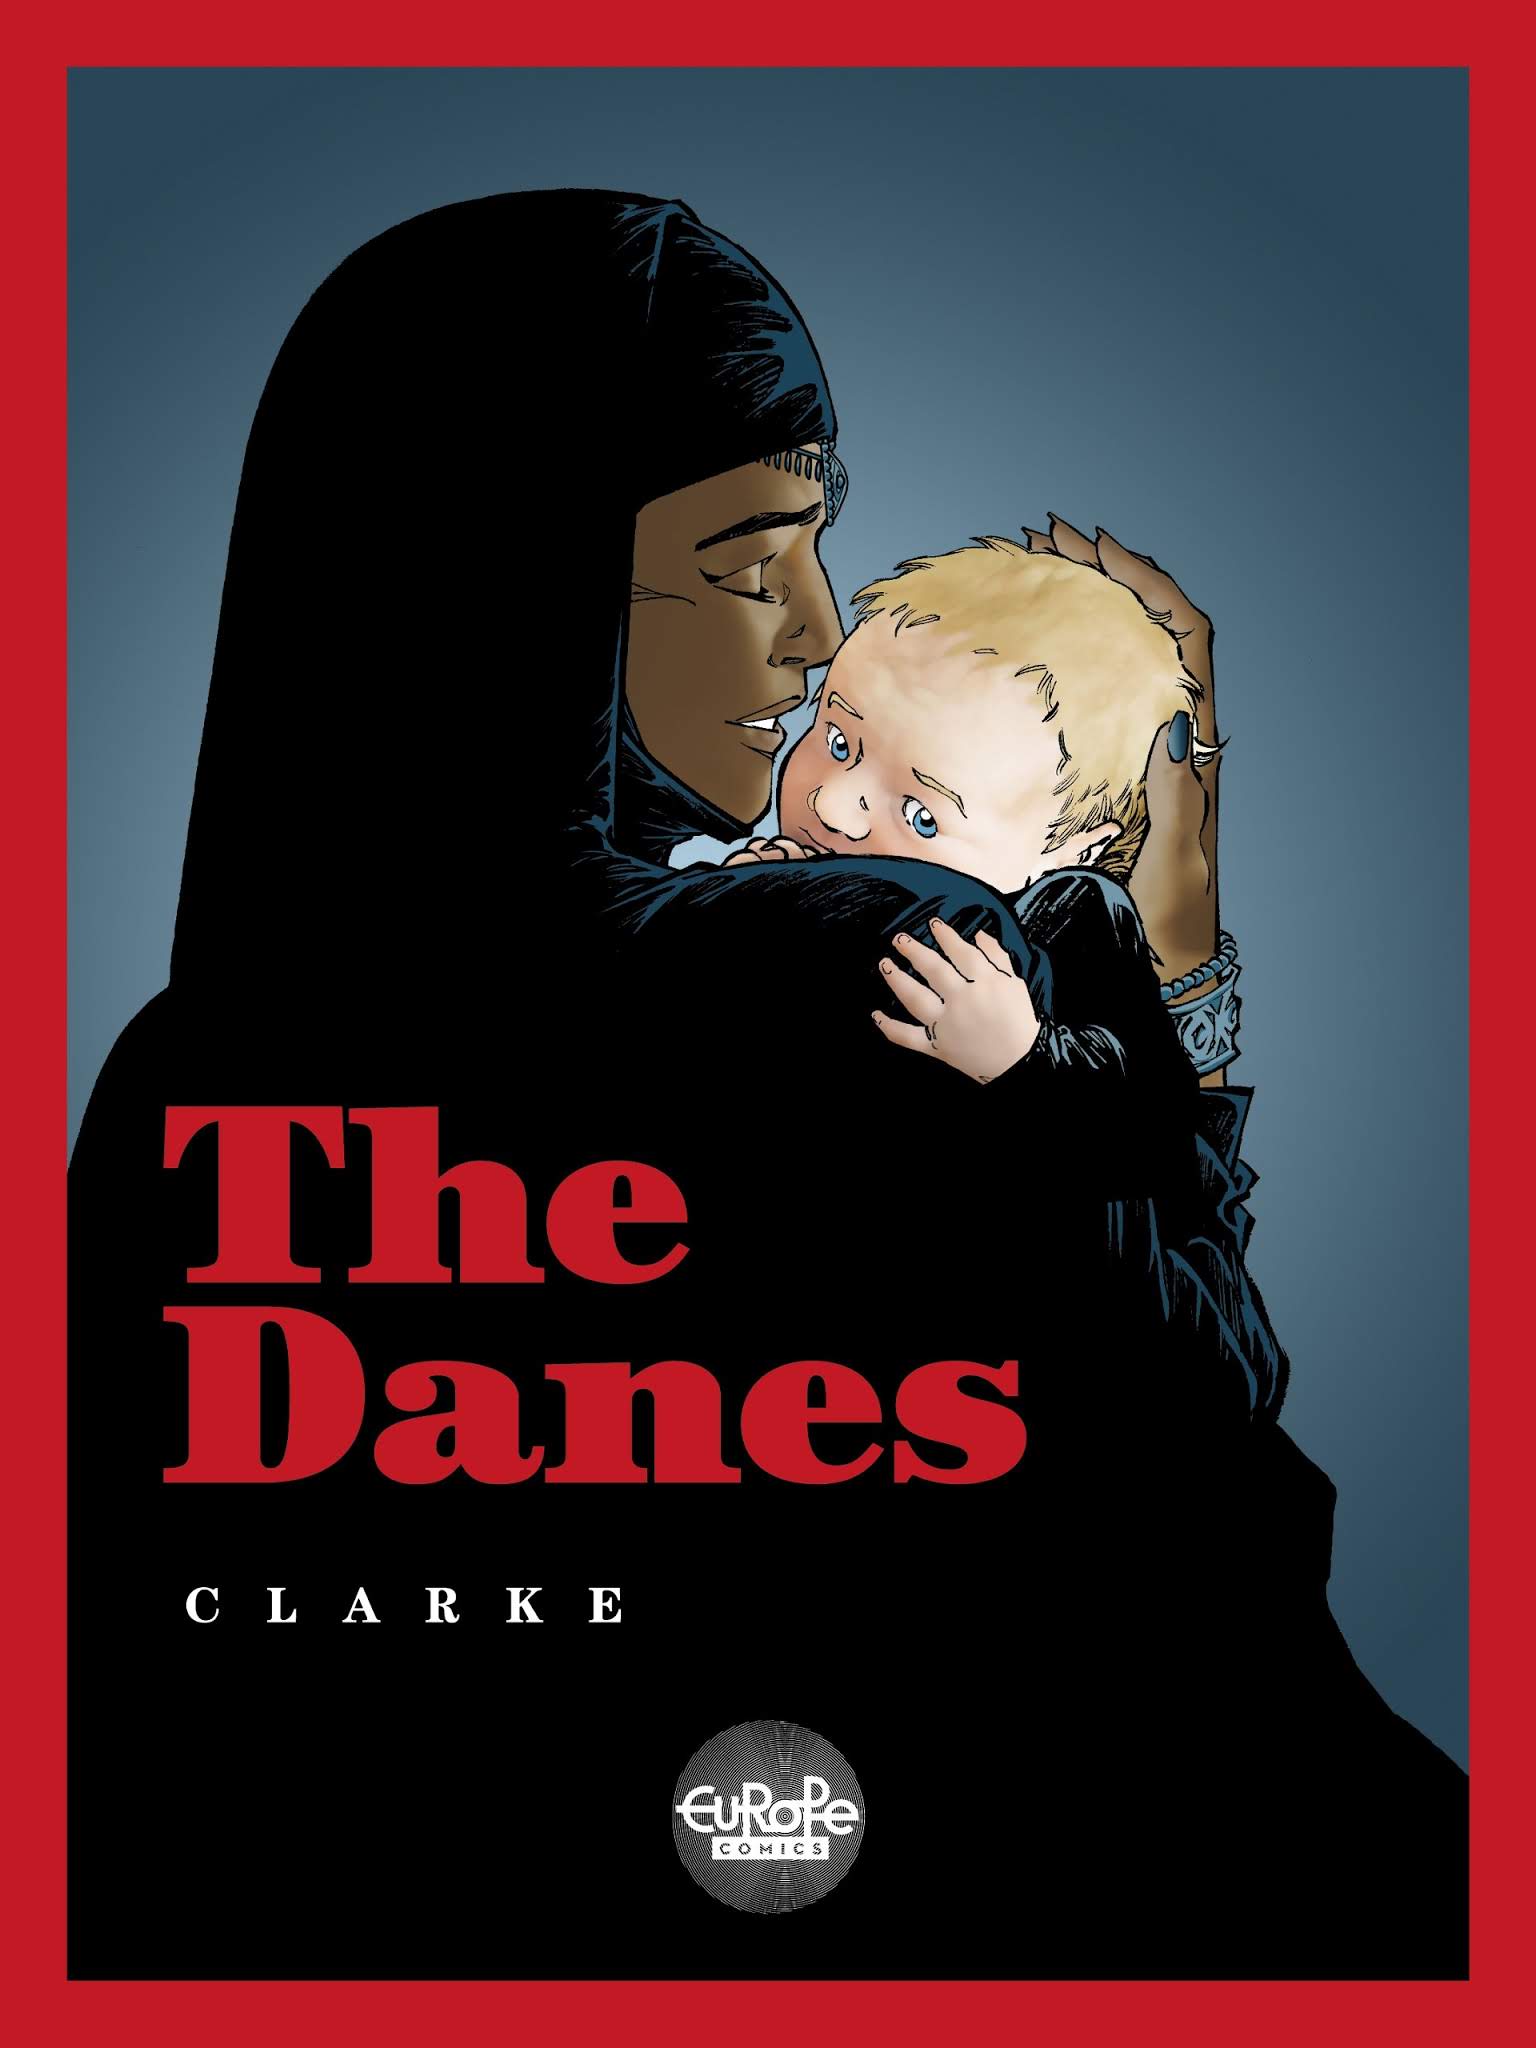 Read online The Danes comic -  Issue # TPB - 1